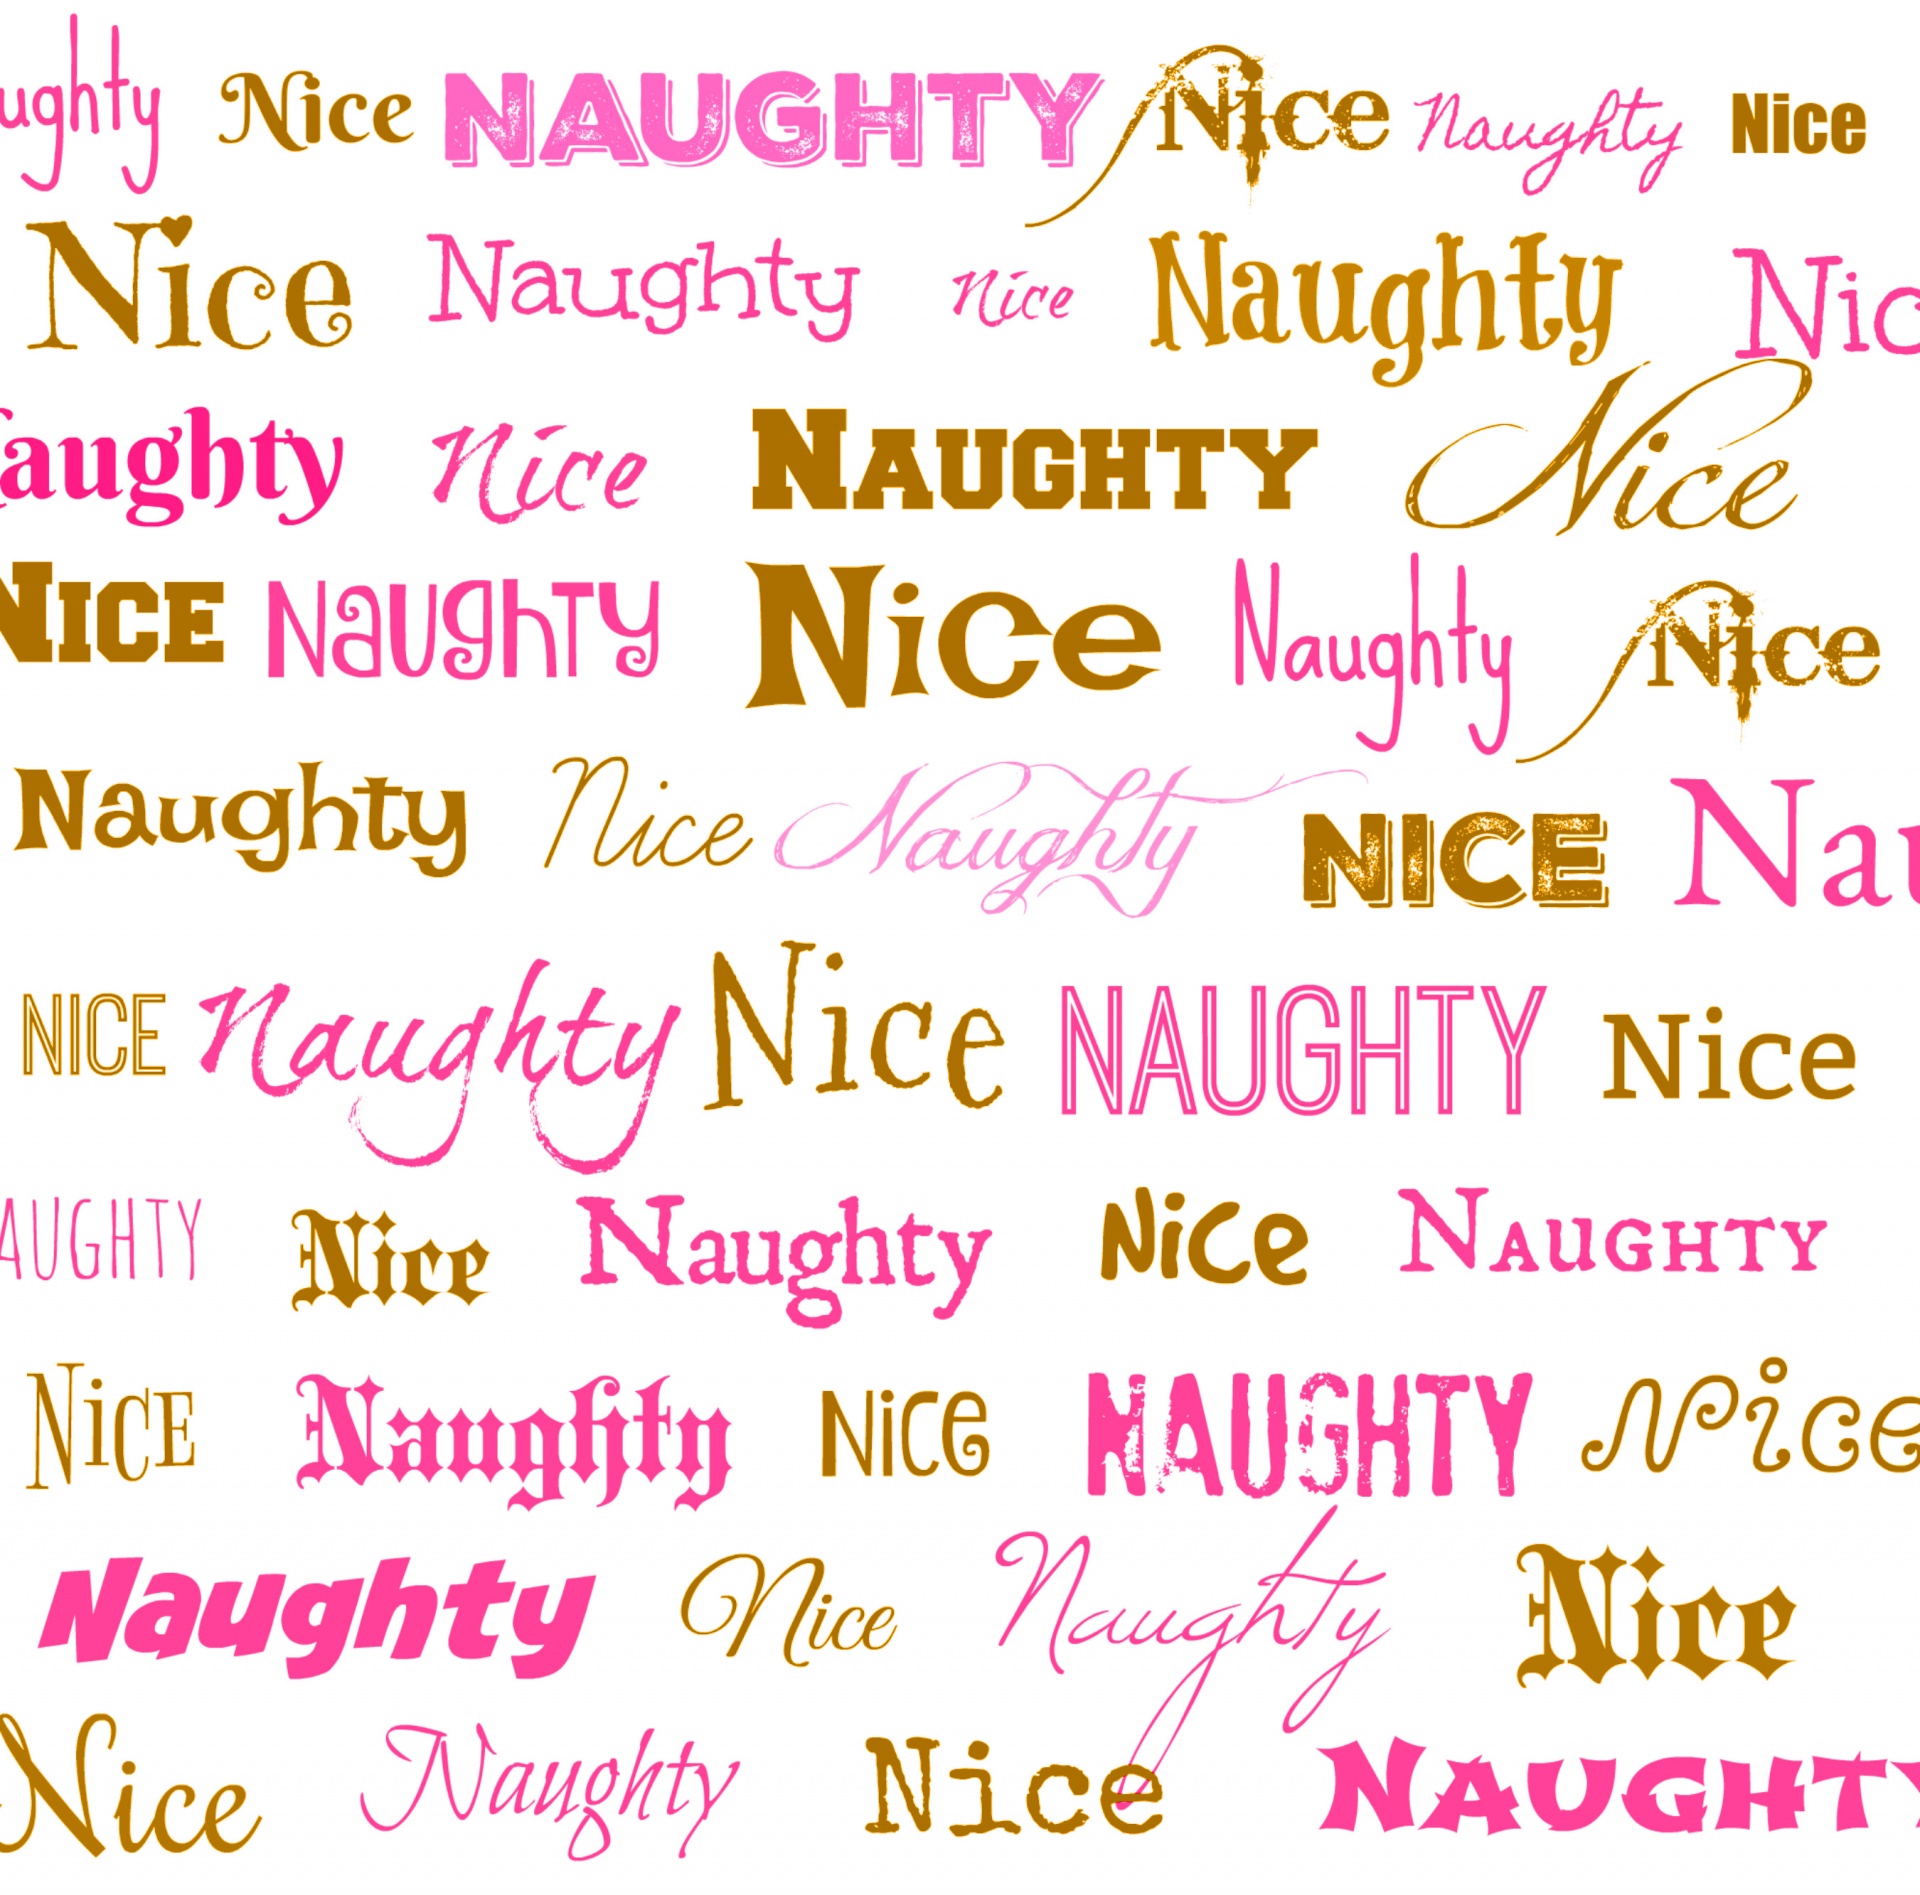 collection of words in different fonts - naughty or nice - Pink and gold